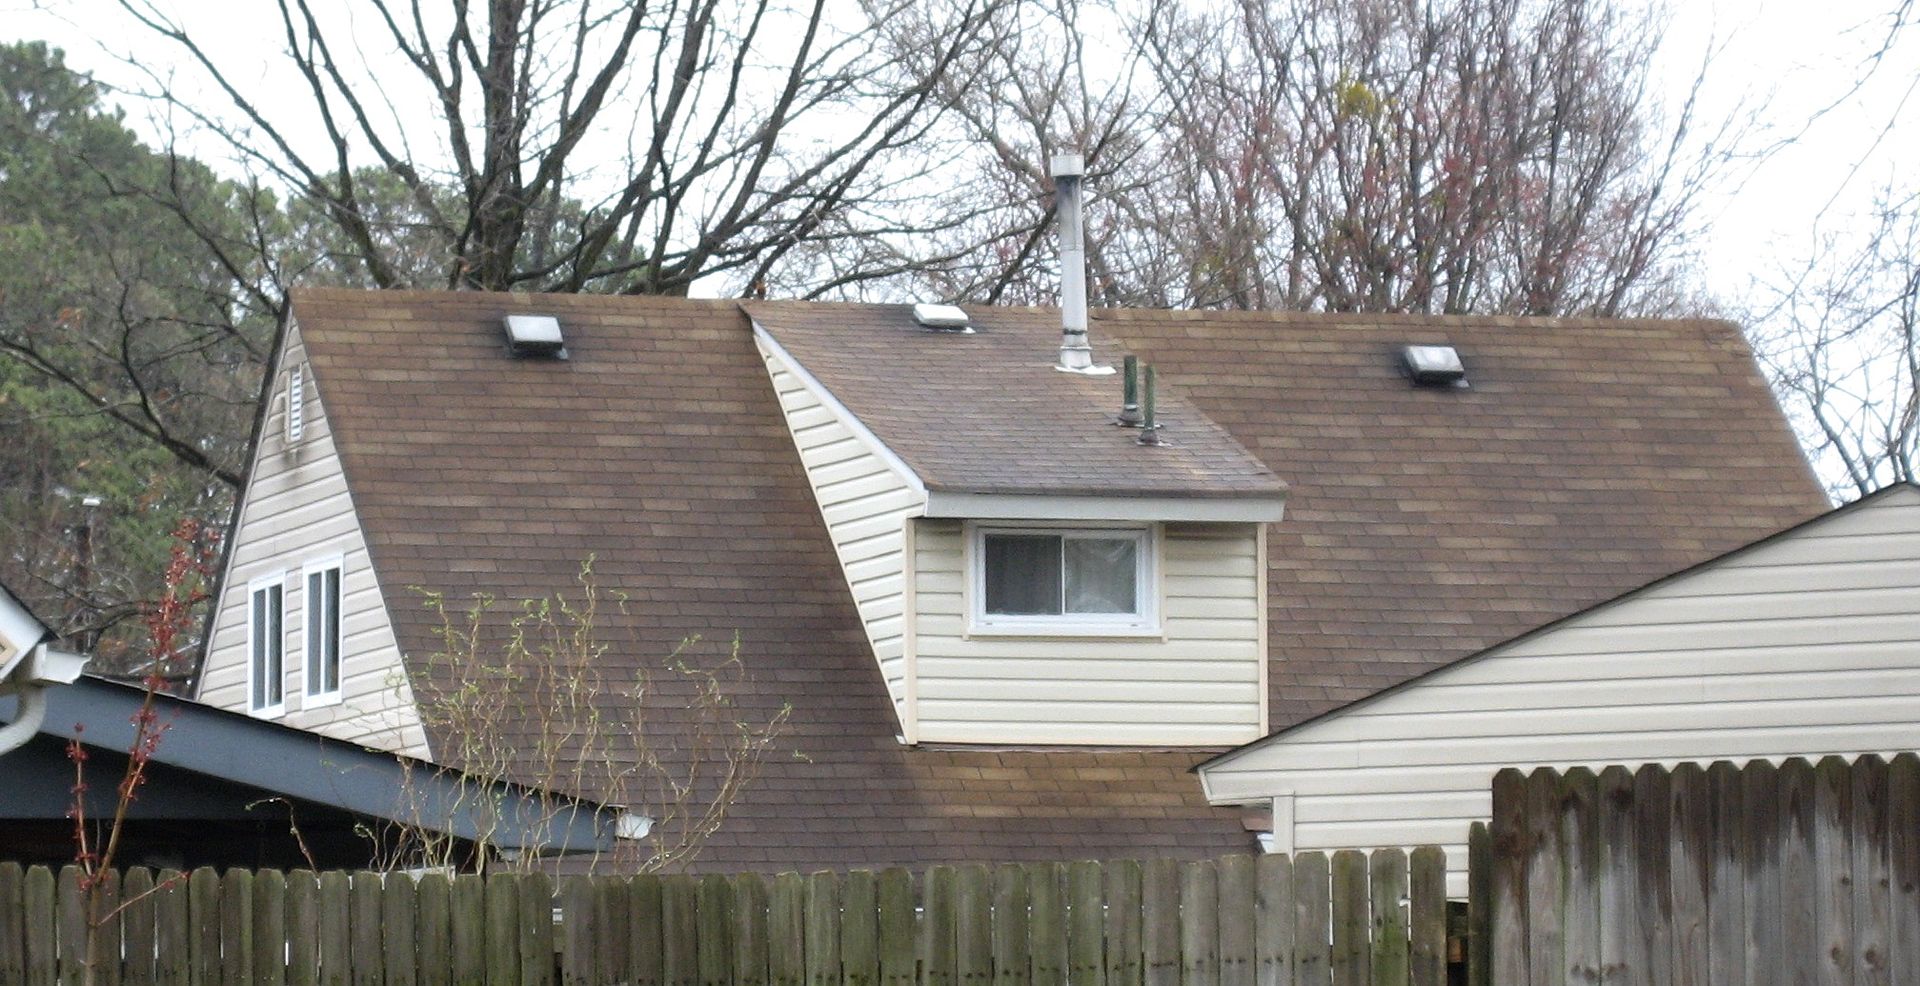 Just like its Levittown twin, the house in Norfolk has a bathroom dormer (on the rear) with an off-center window.